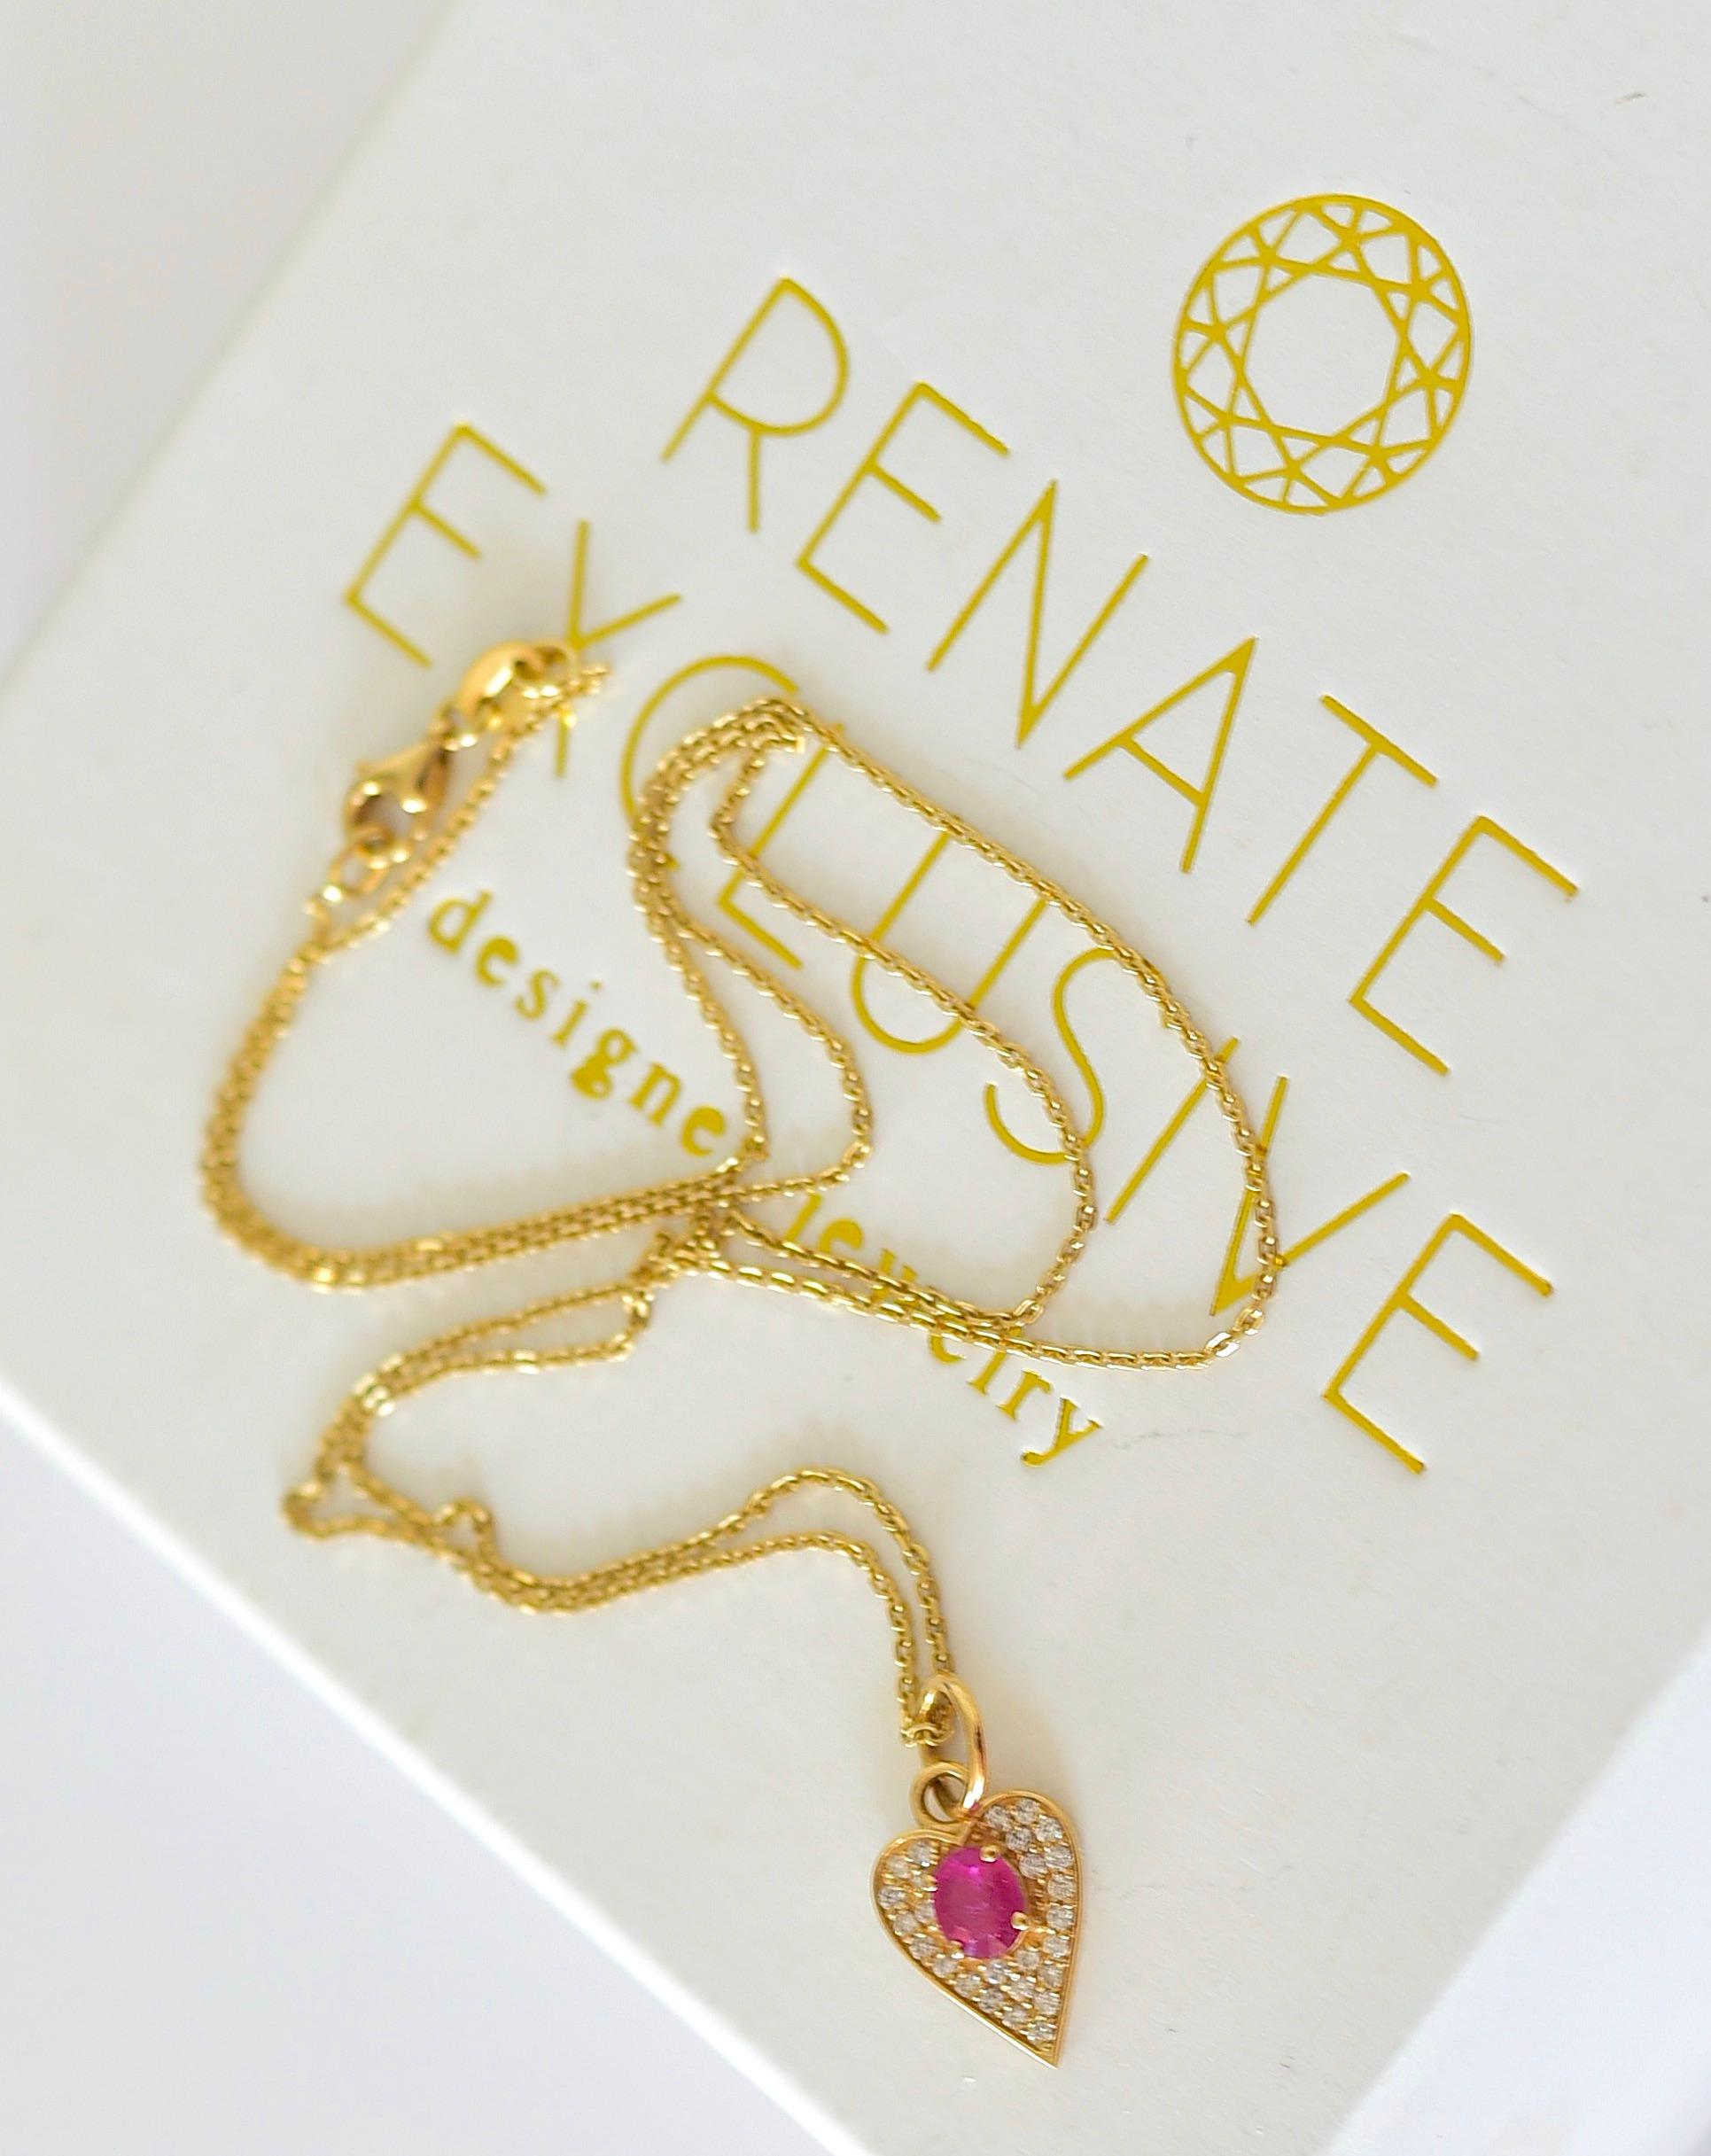 Bead 14K Solid Yellow Gold, Ruby and Diamond Accents Necklace.